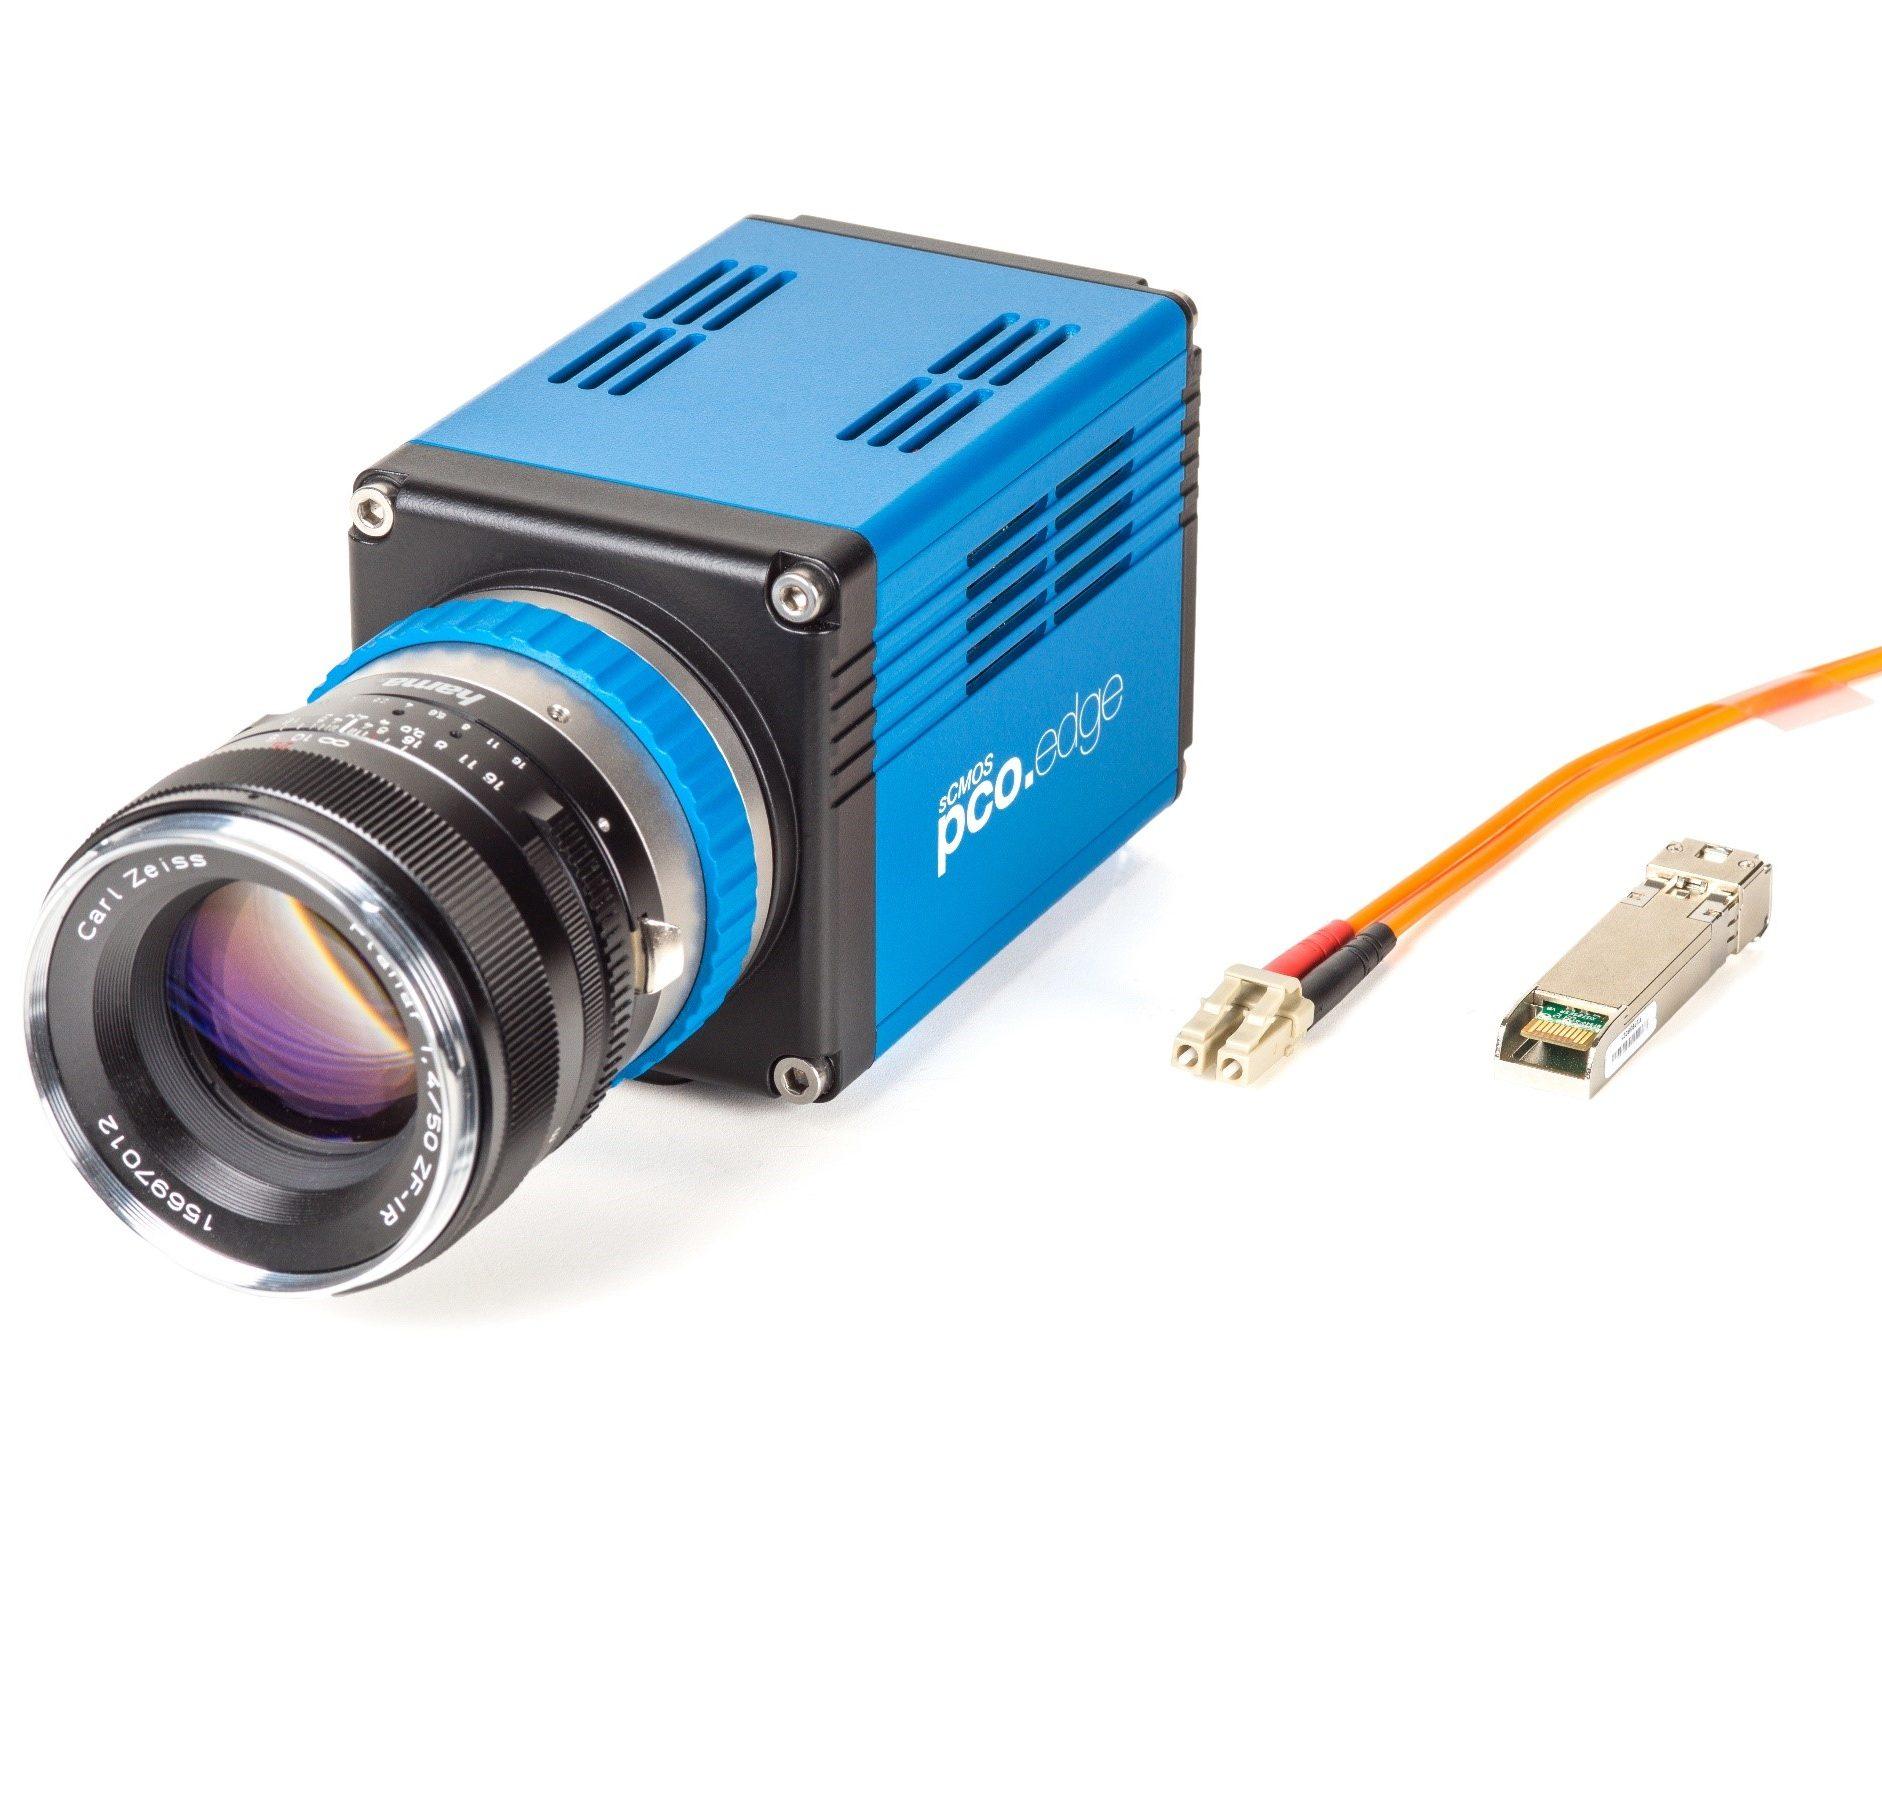 Product pco.edge CLHS sCMOS camera - Photon Lines UK image